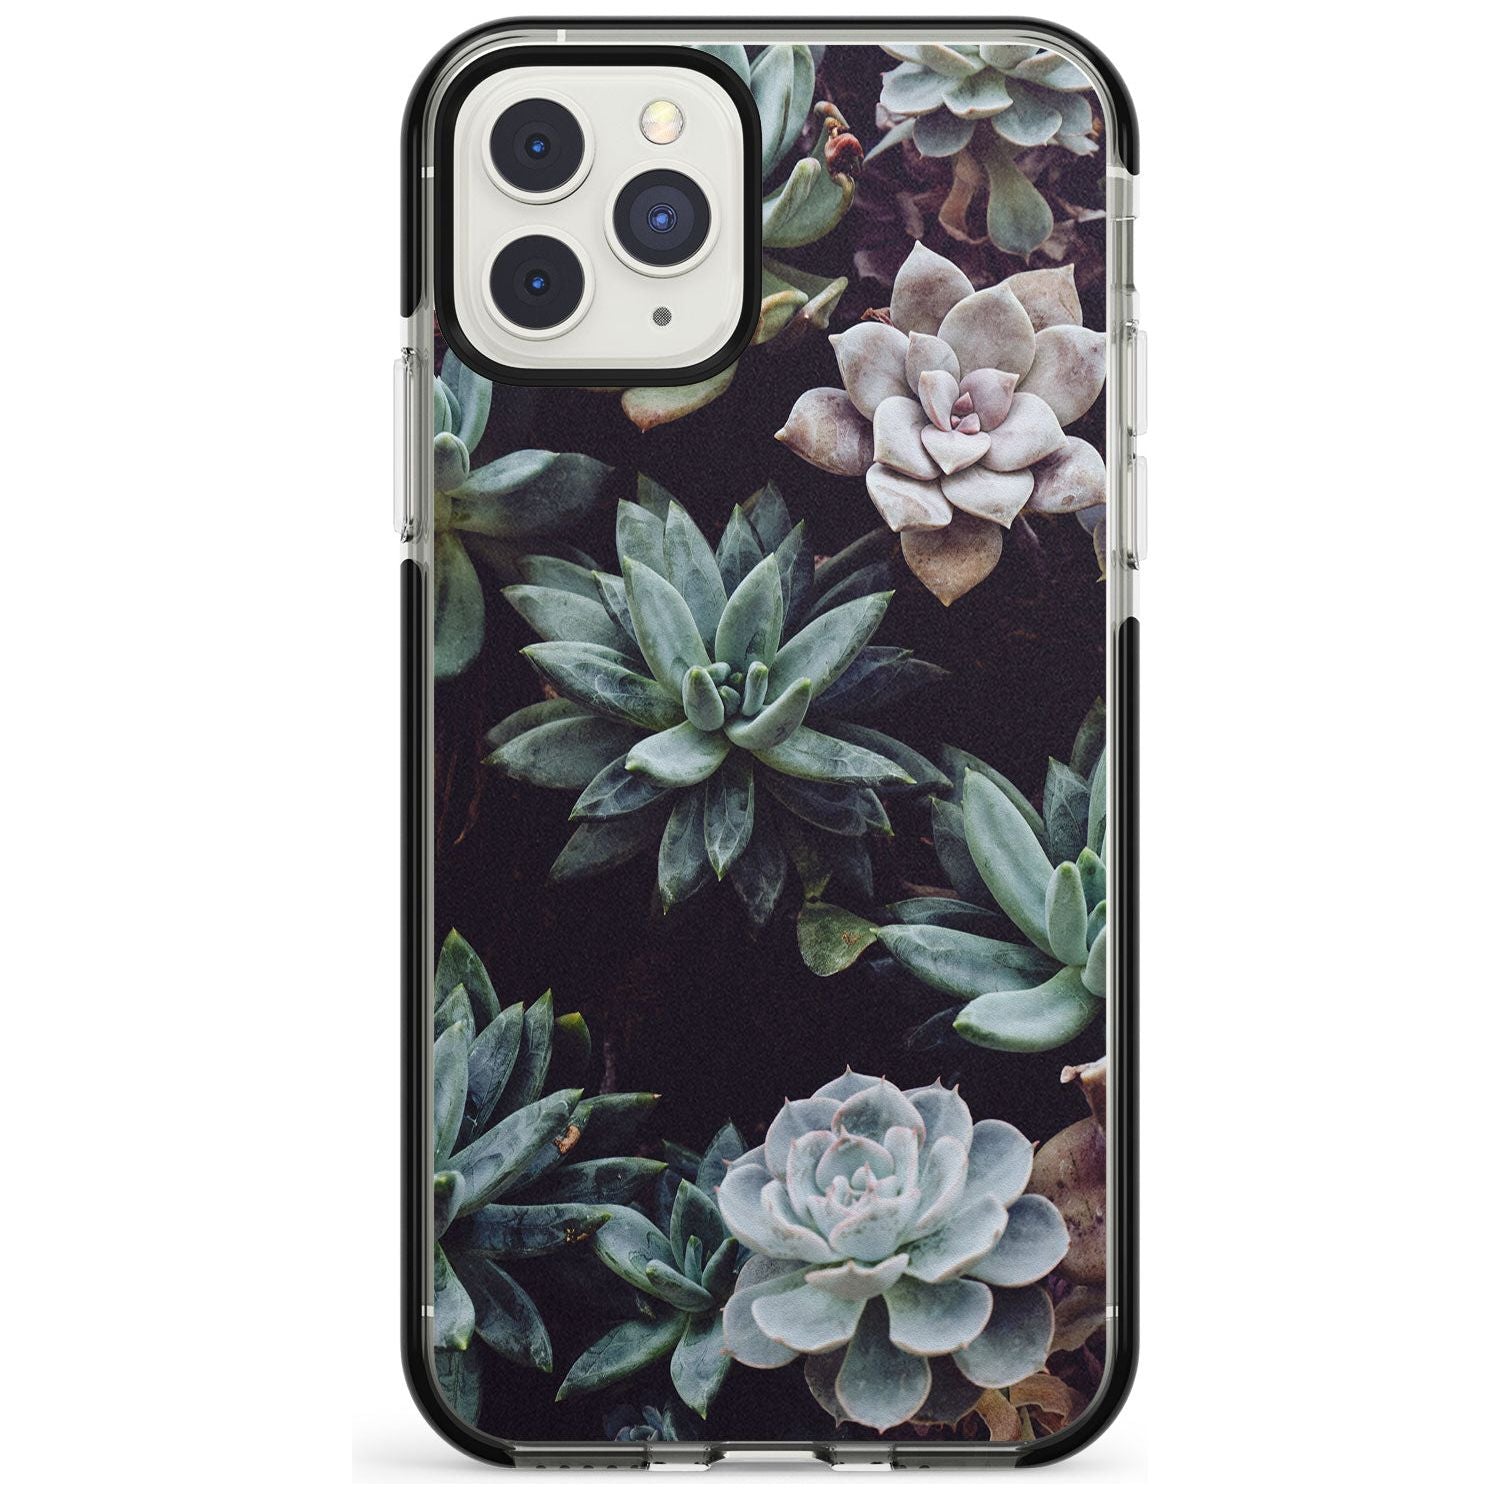 Mixed Succulents - Real Botanical Photographs Black Impact Phone Case for iPhone 11 Pro Max